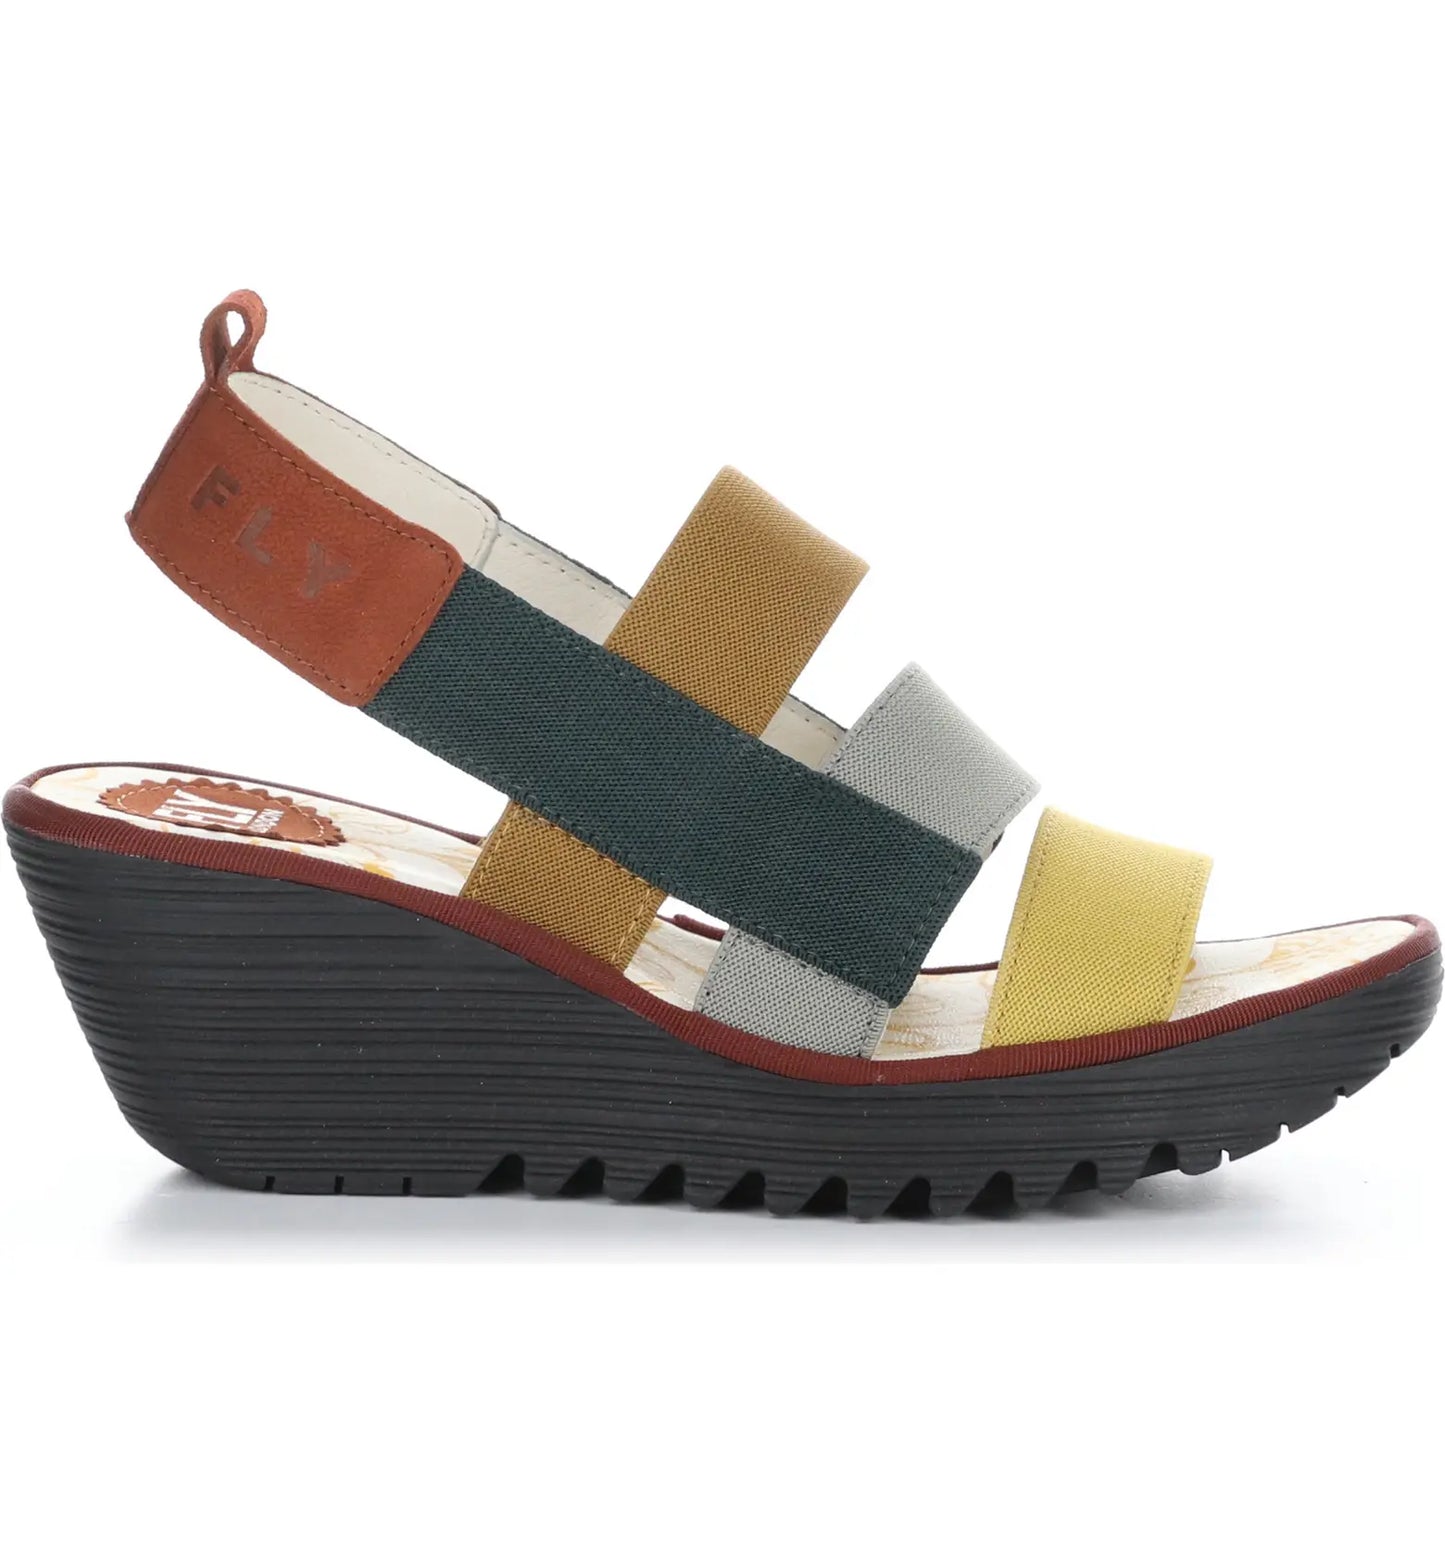 Fly London slip-on, fully leather lined sandal offers a black, shock absorbing 2.5 inch wedge sole, stretchy comfortable fabric straps in lovely autumn tones.   Made in Portugal